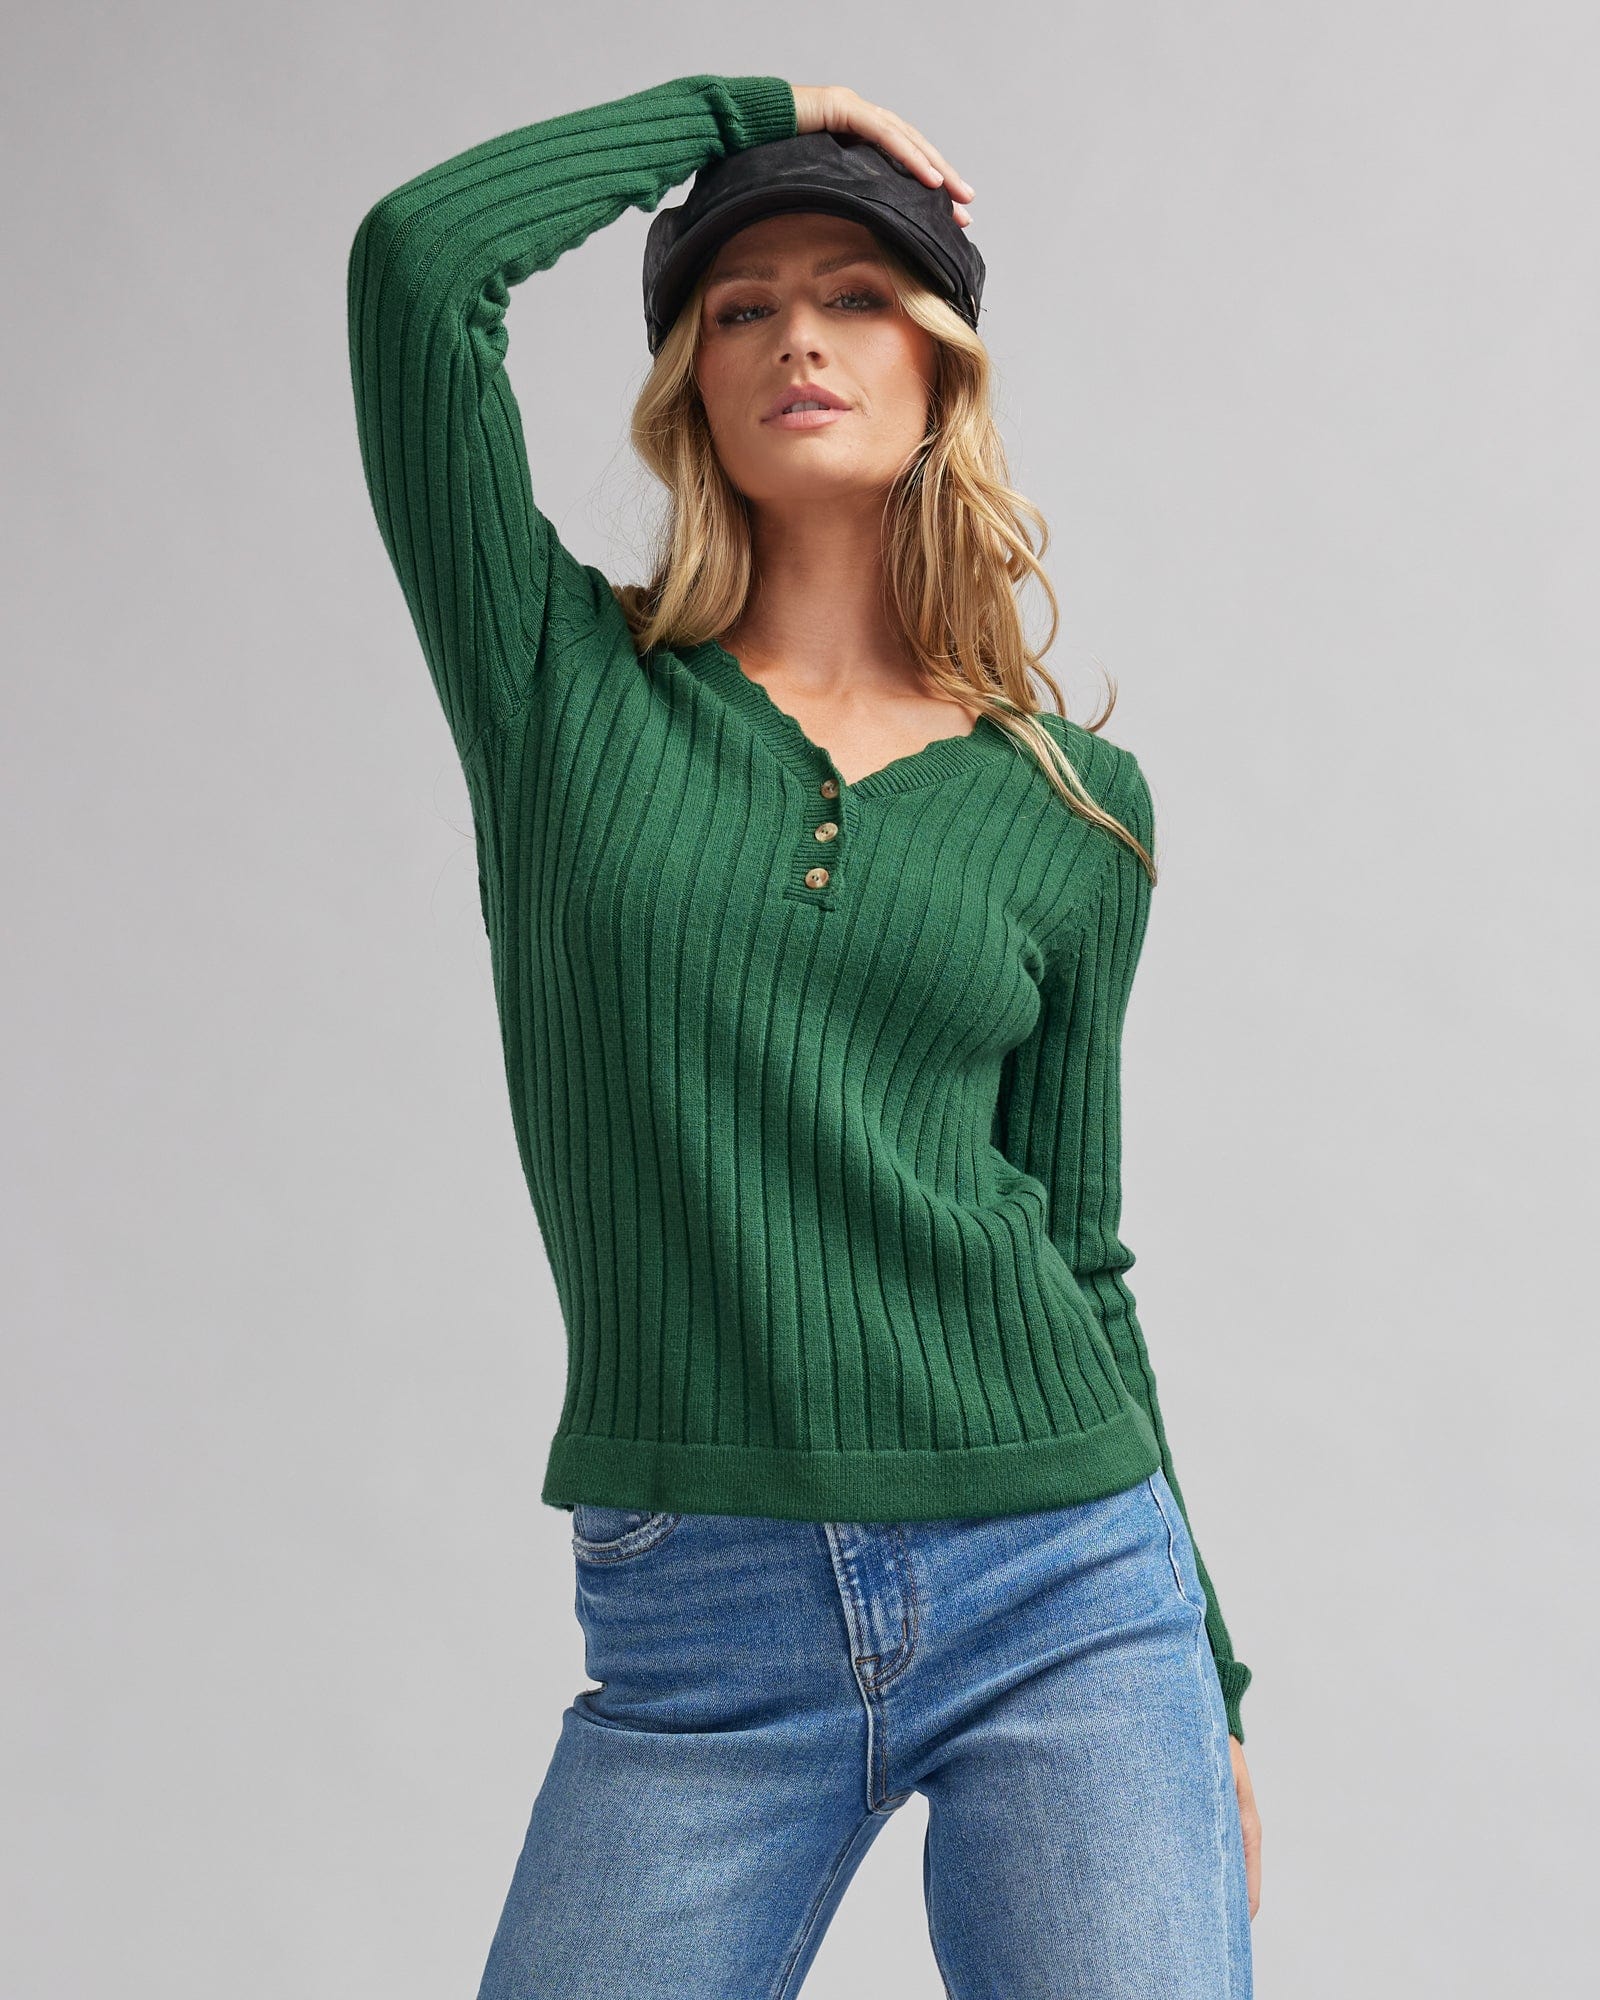 Woman in a long sleeve, green , ribbed sweater